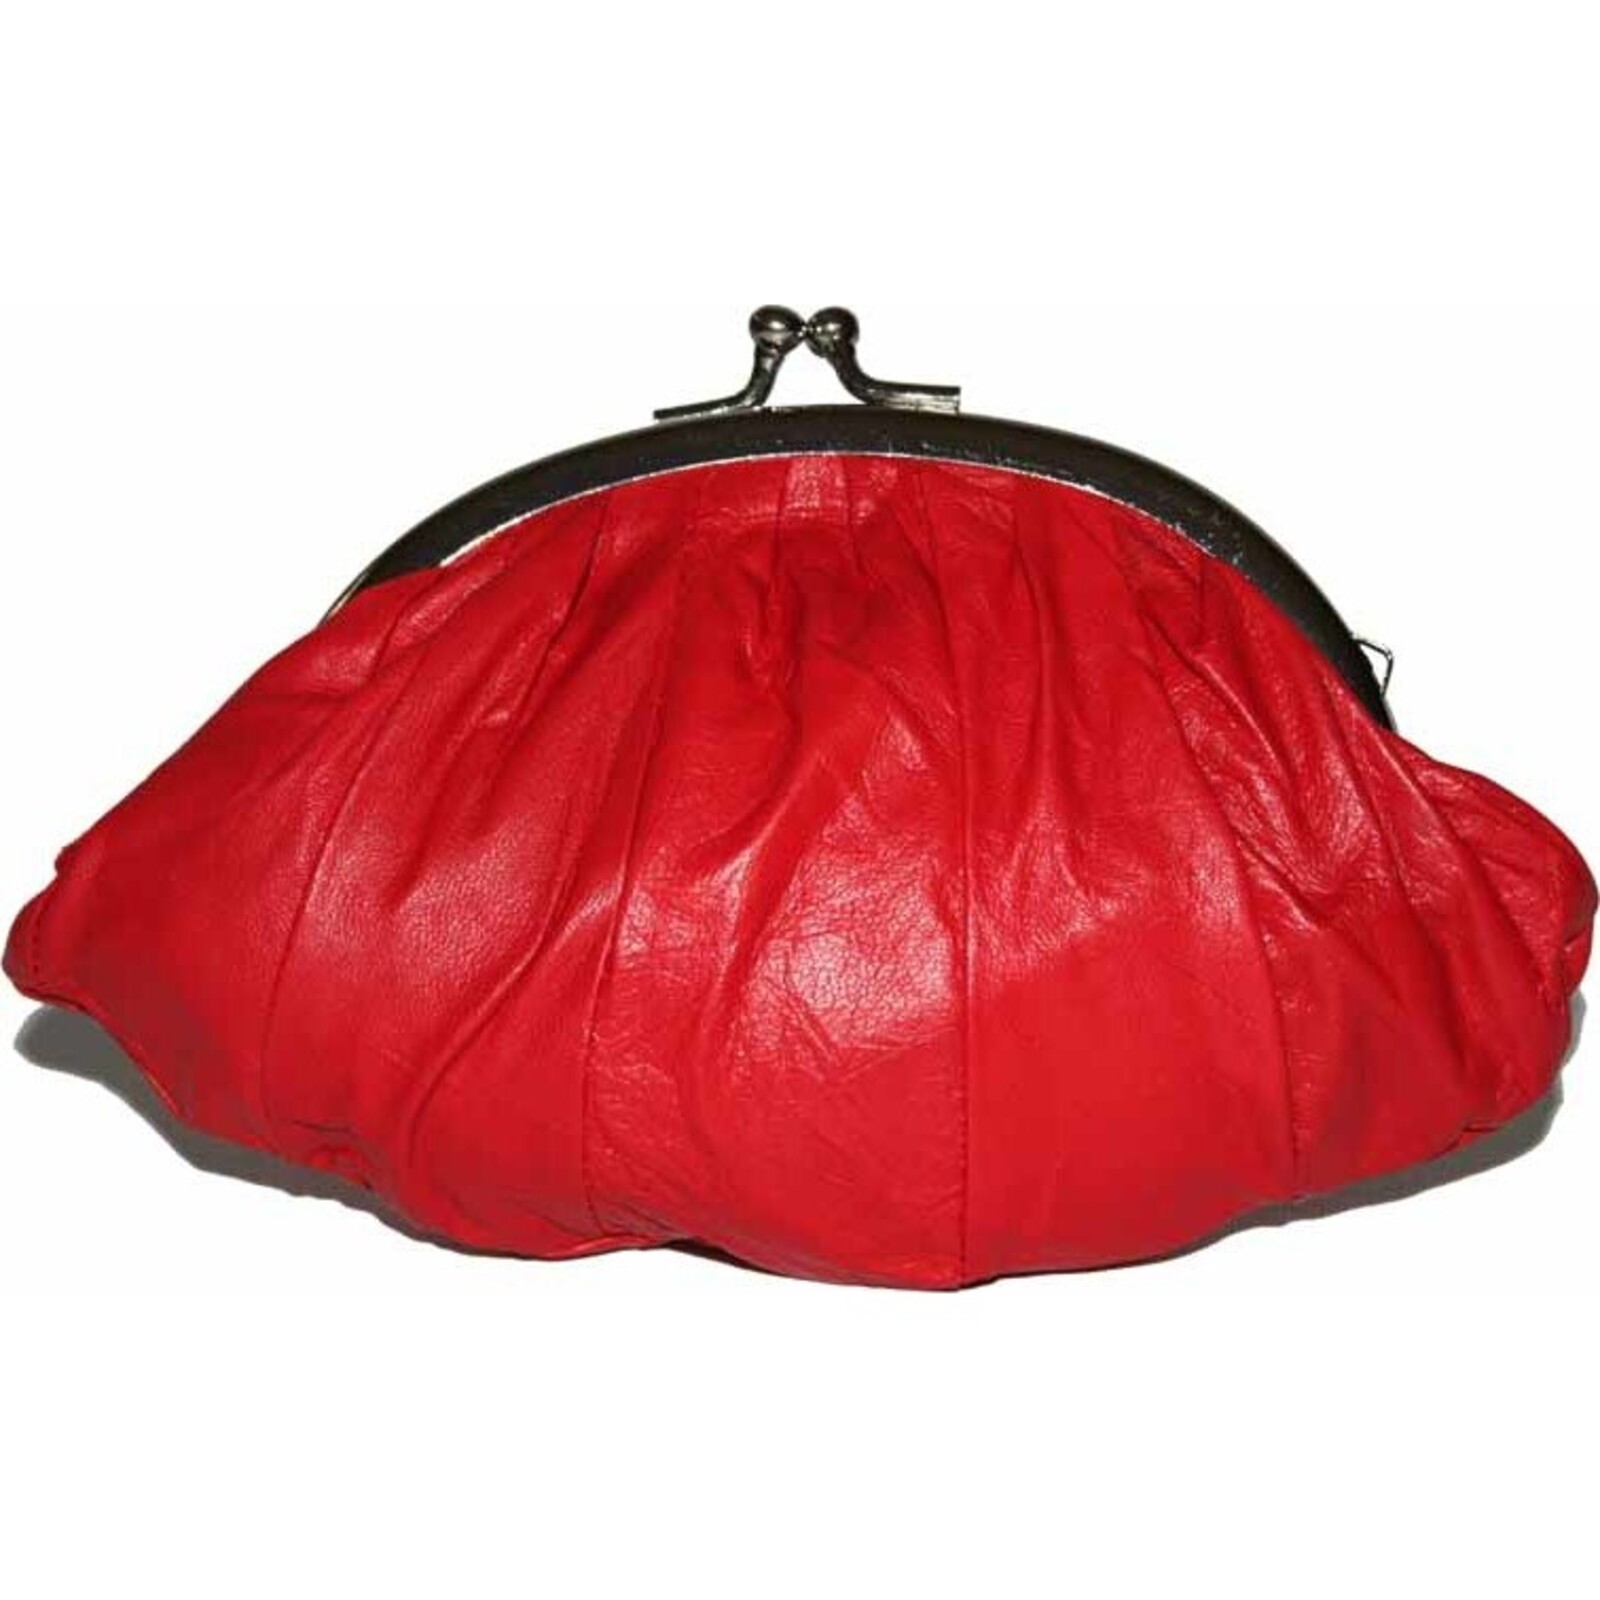 Leather Puff Purse - Red